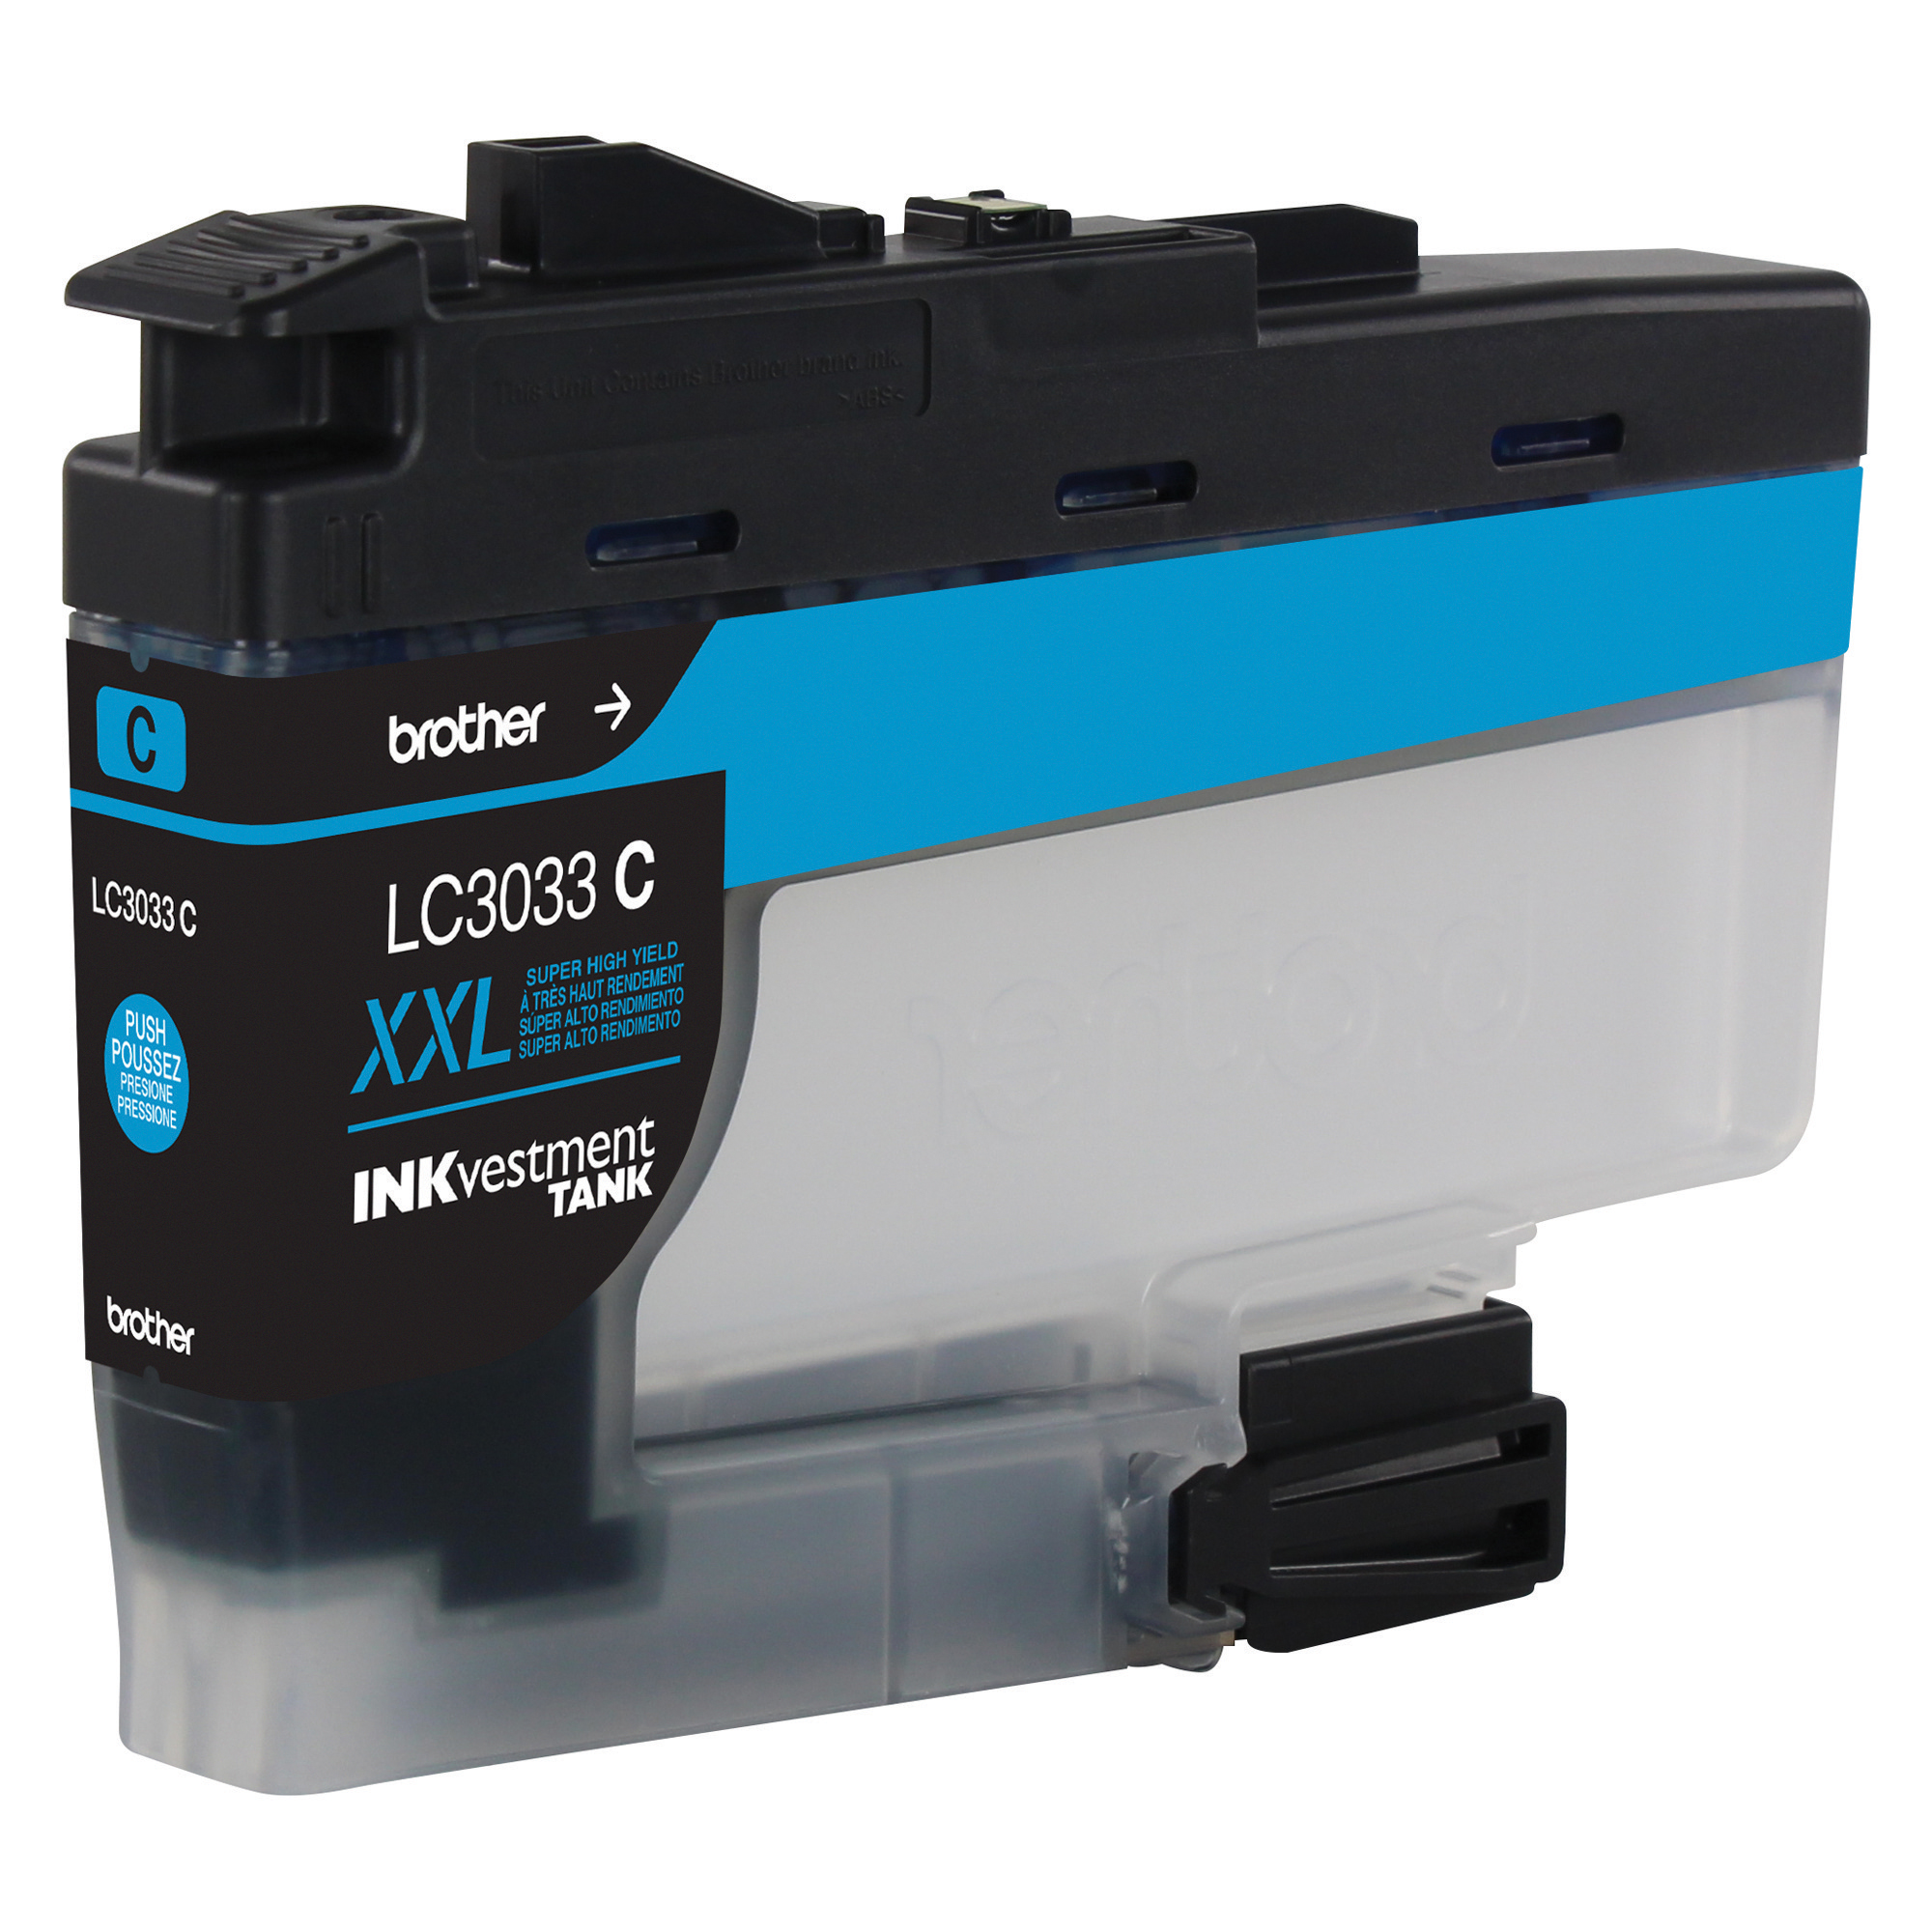 Brother Genuine LC3033C, Single Pack Super High-yield Cyan INKvestment Tank Ink Cartridge, Page Yield Up To 1,500 Pages, LC3033 - image 2 of 6